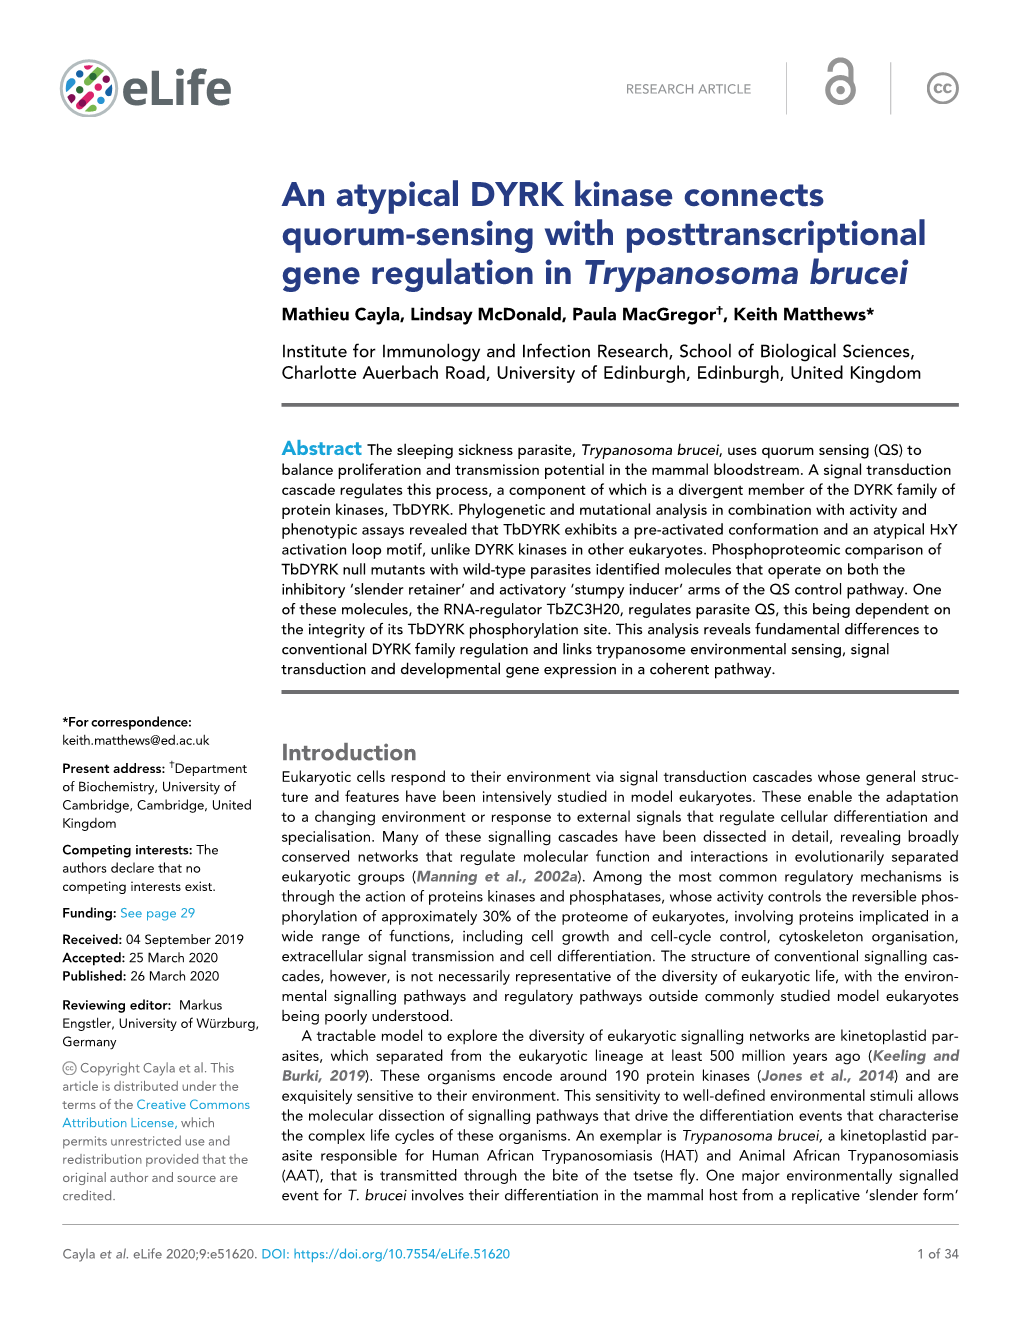 An Atypical DYRK Kinase Connects Quorum-Sensing With